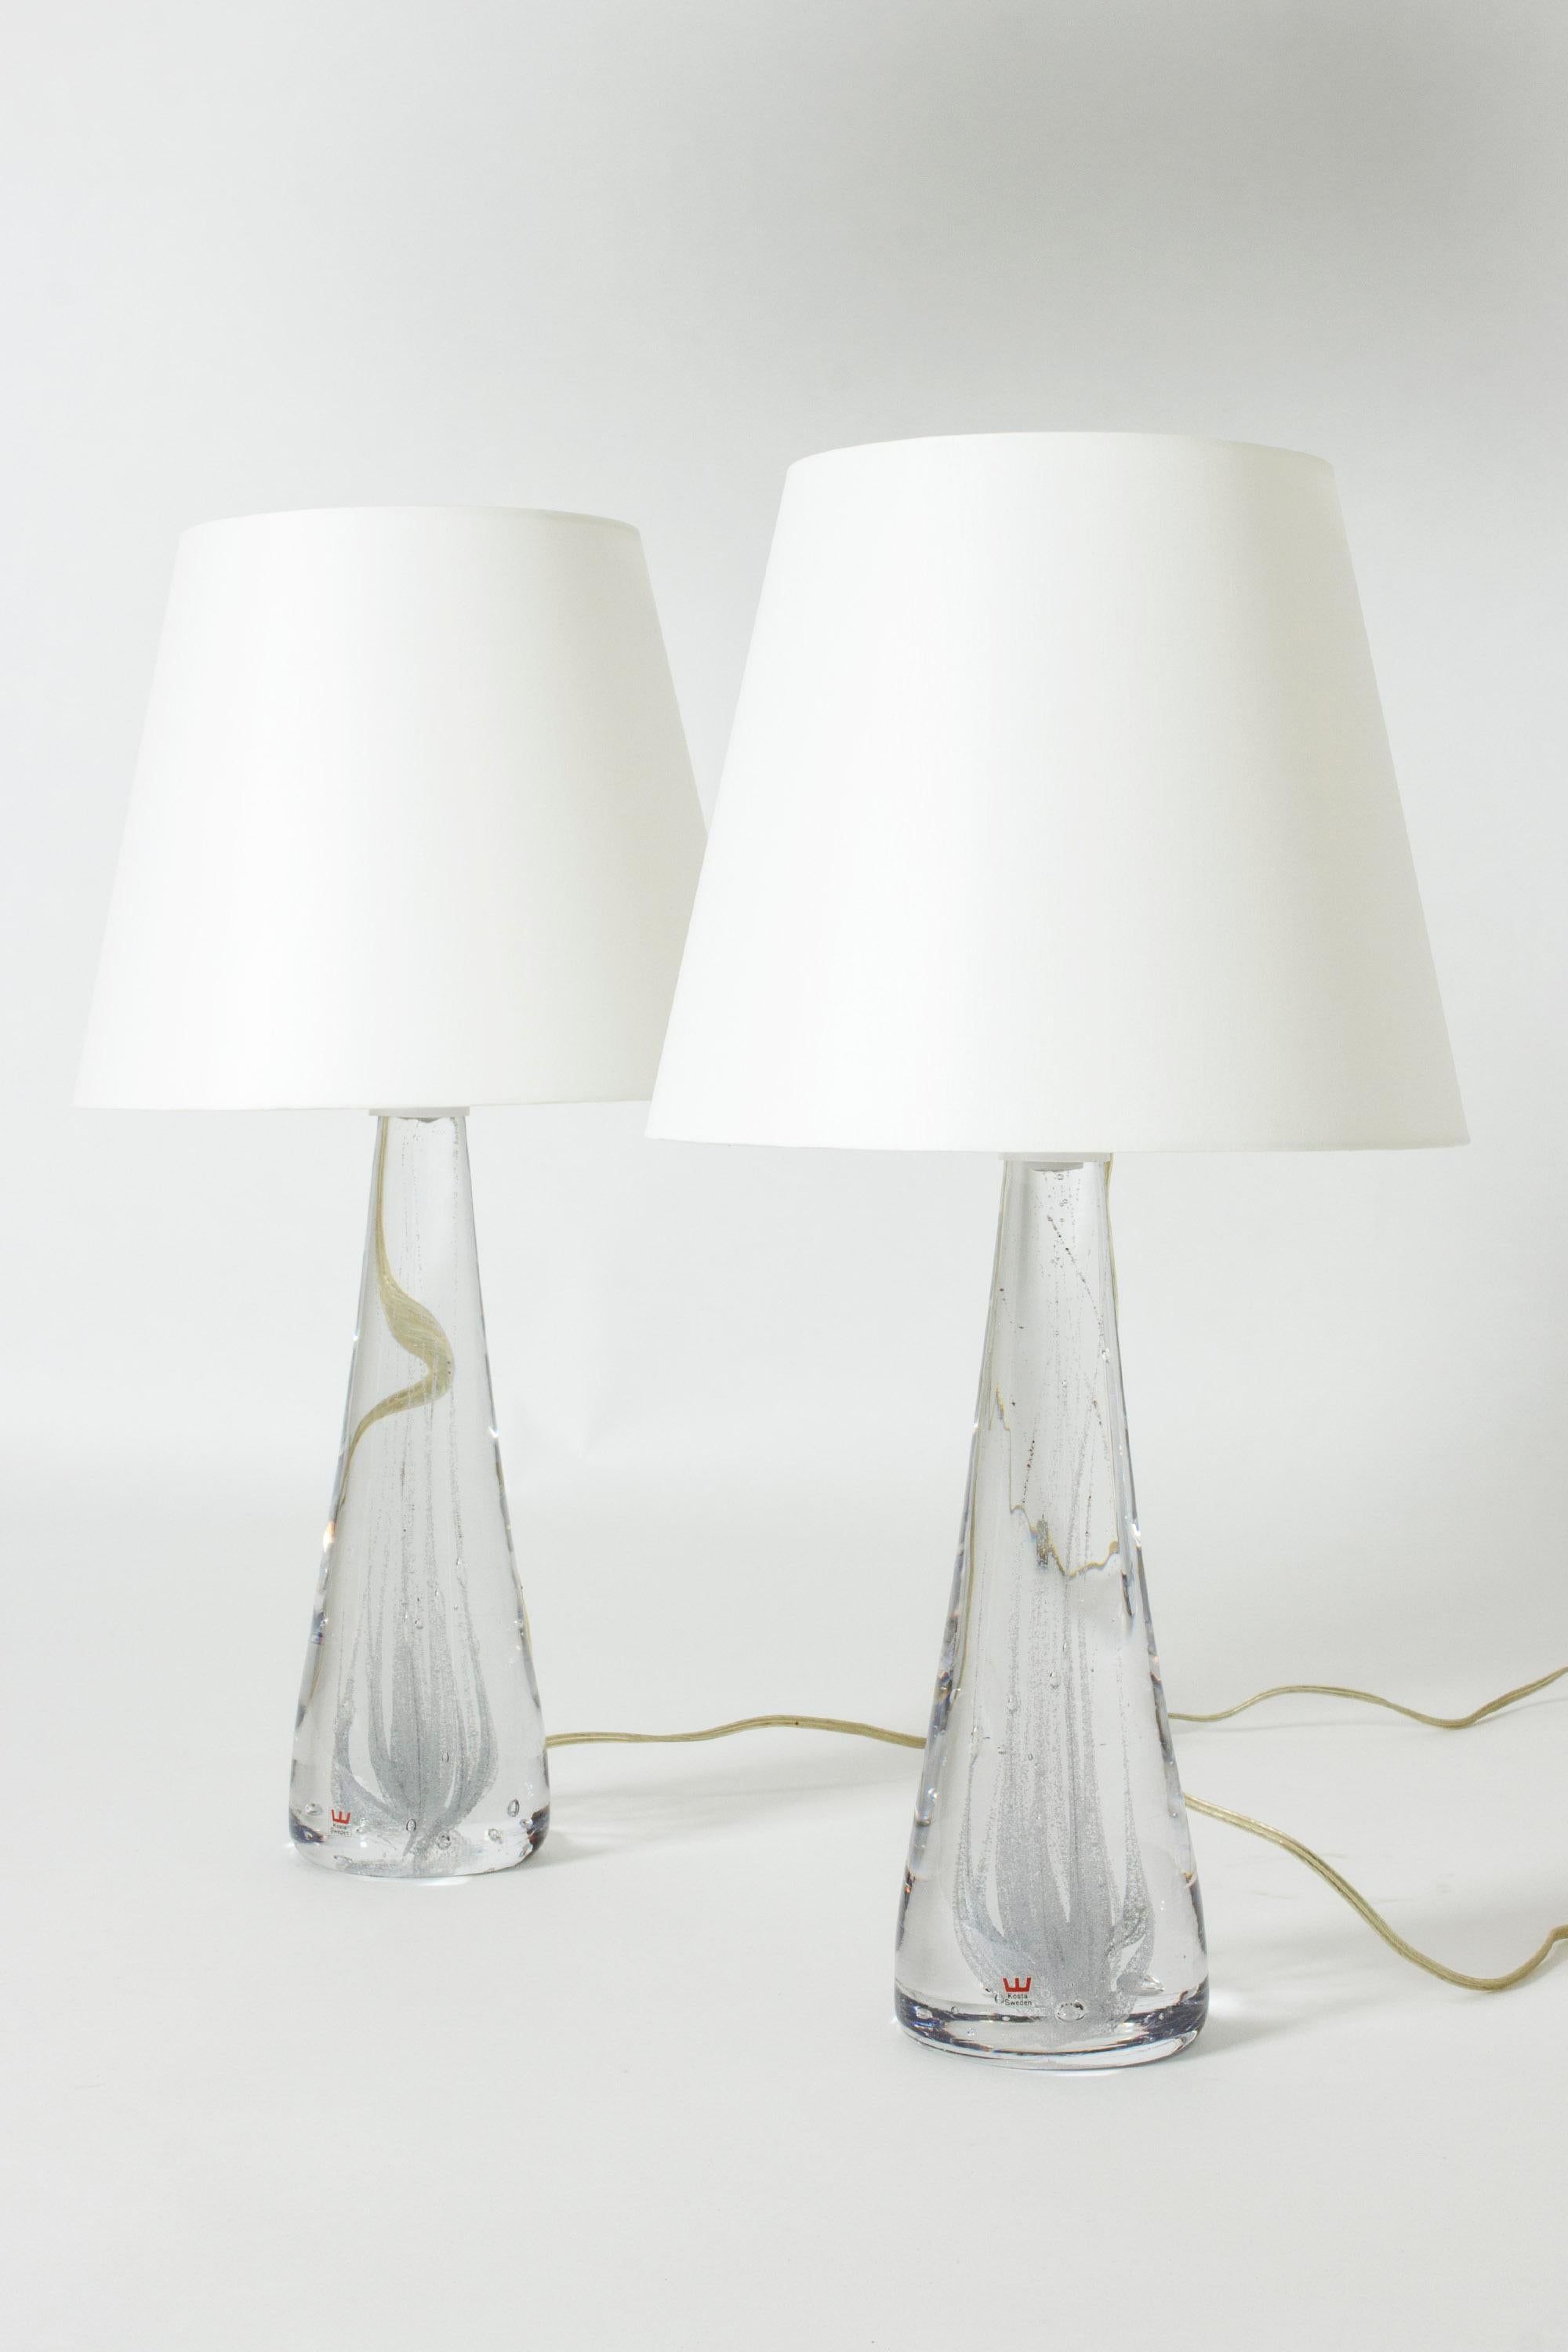 Pair of beautiful crystal glass table lamps by Vicke Lindstrand, organic conical in shape and with swirls of bubbles captured inside. Some of the bubbles are colored dark red, for a subtle contrast.